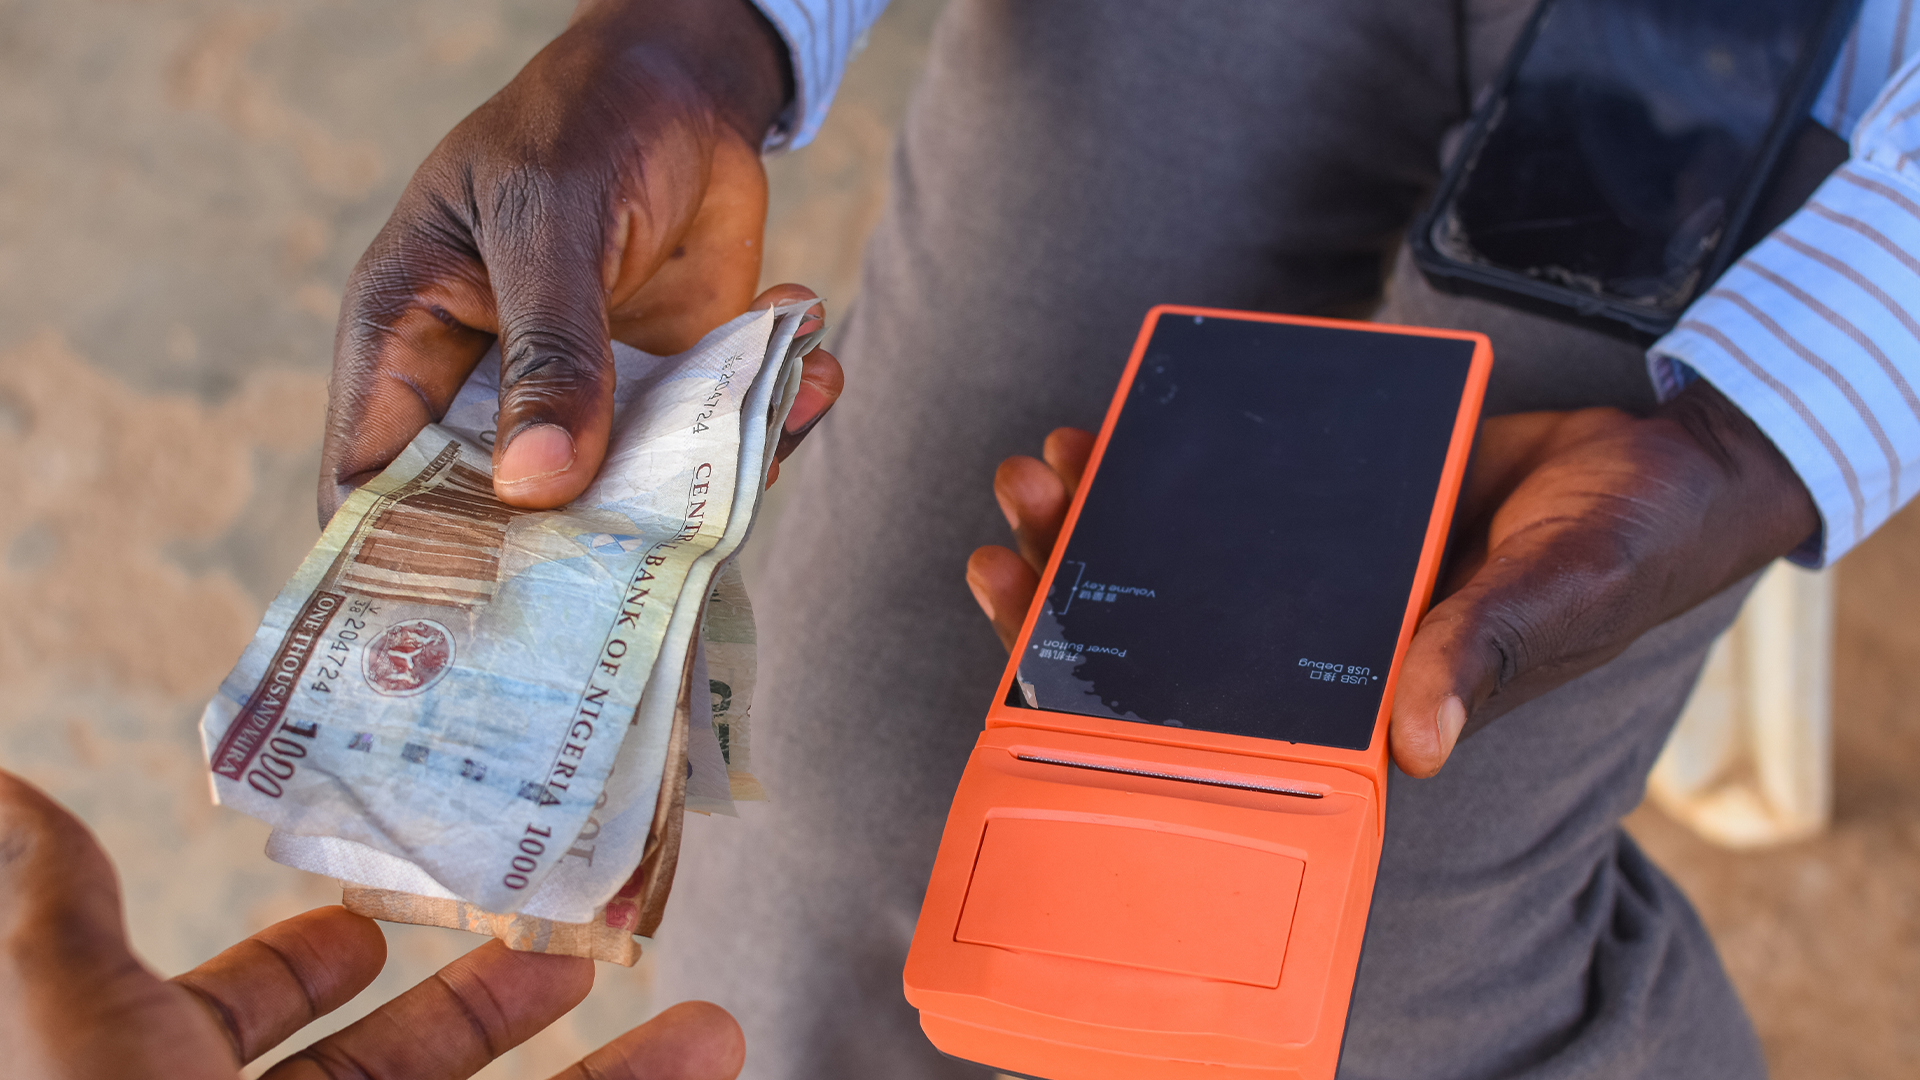 Hands of two african individuals doing financial transaction with a point of sales POS terminal as Cash, Naira, Money or currency is exchanging hands